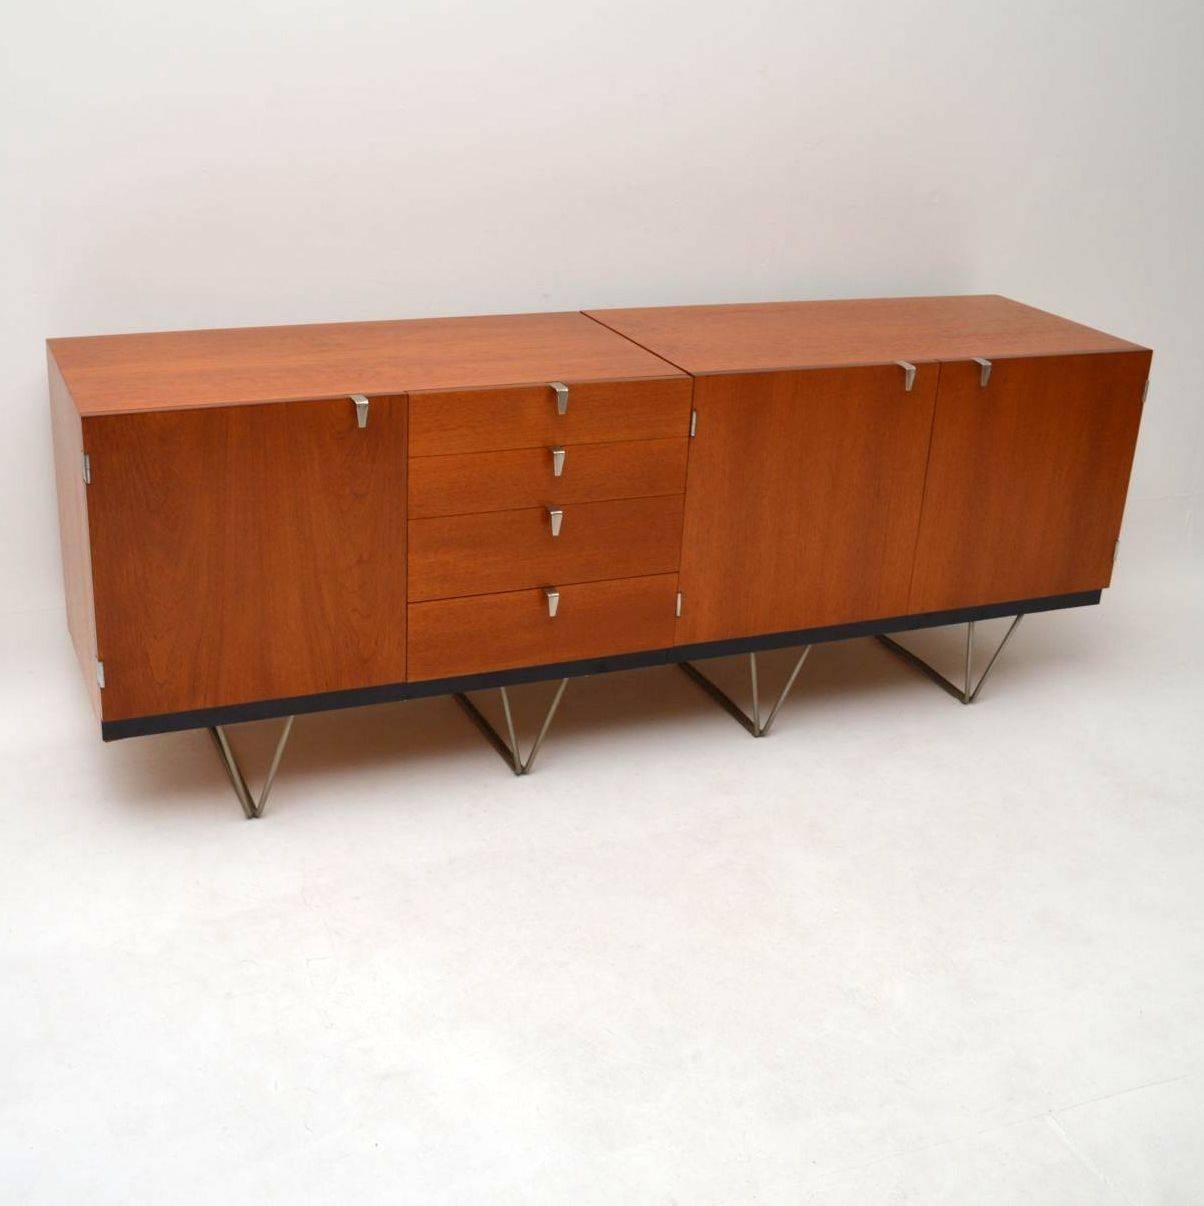 A stunning pair of teak vintage cabinets on hairpin legs, these were designed by John & Sylvia Reid for Stag Furniture’s S-range, they date from the 1950s-1960s. They can be used standing separately, or can be pushed together to make one long